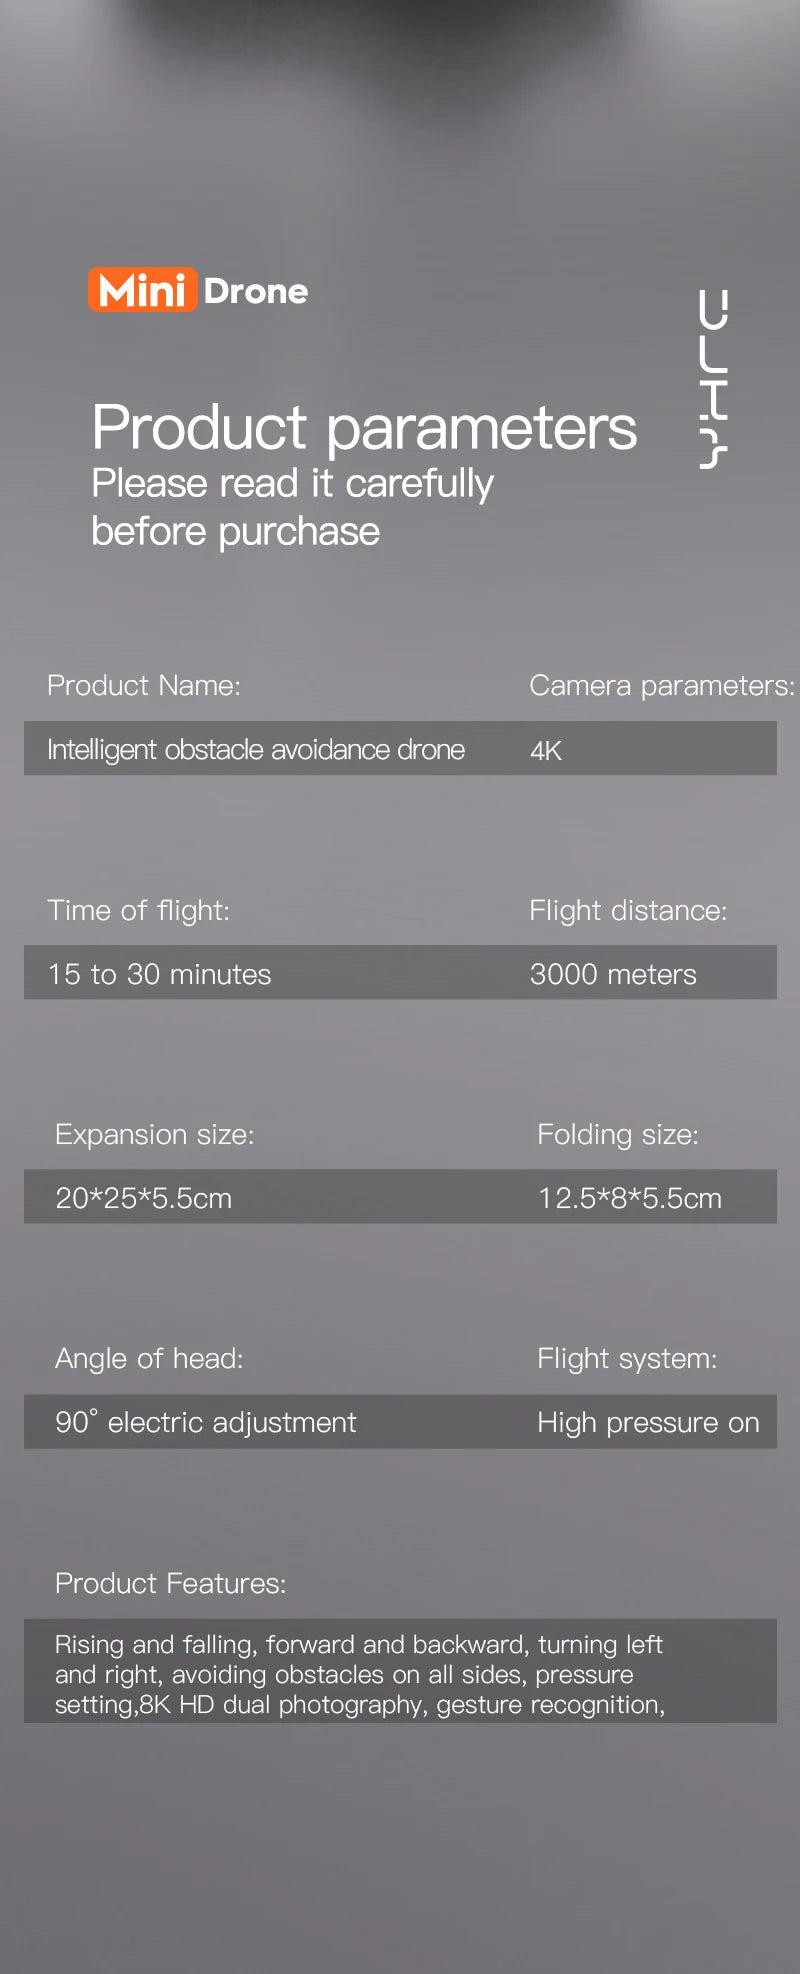 P12 Drone, drone 4k time of flight: flight distance: 15 to 30 minutes